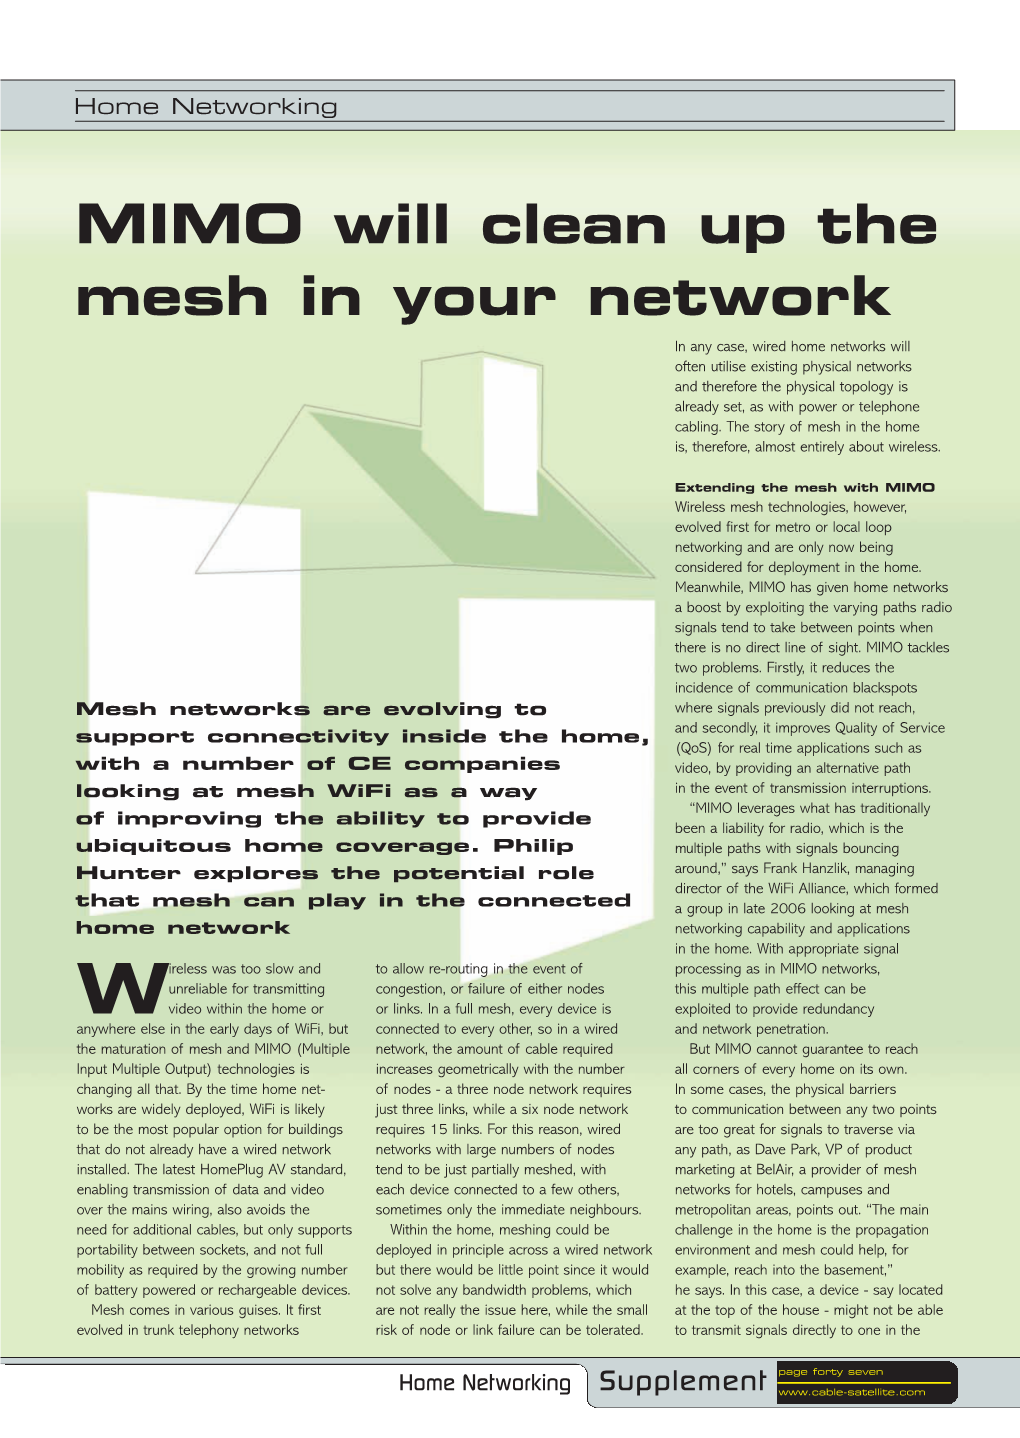 MIMO Will Clean up the Mesh in Your Network